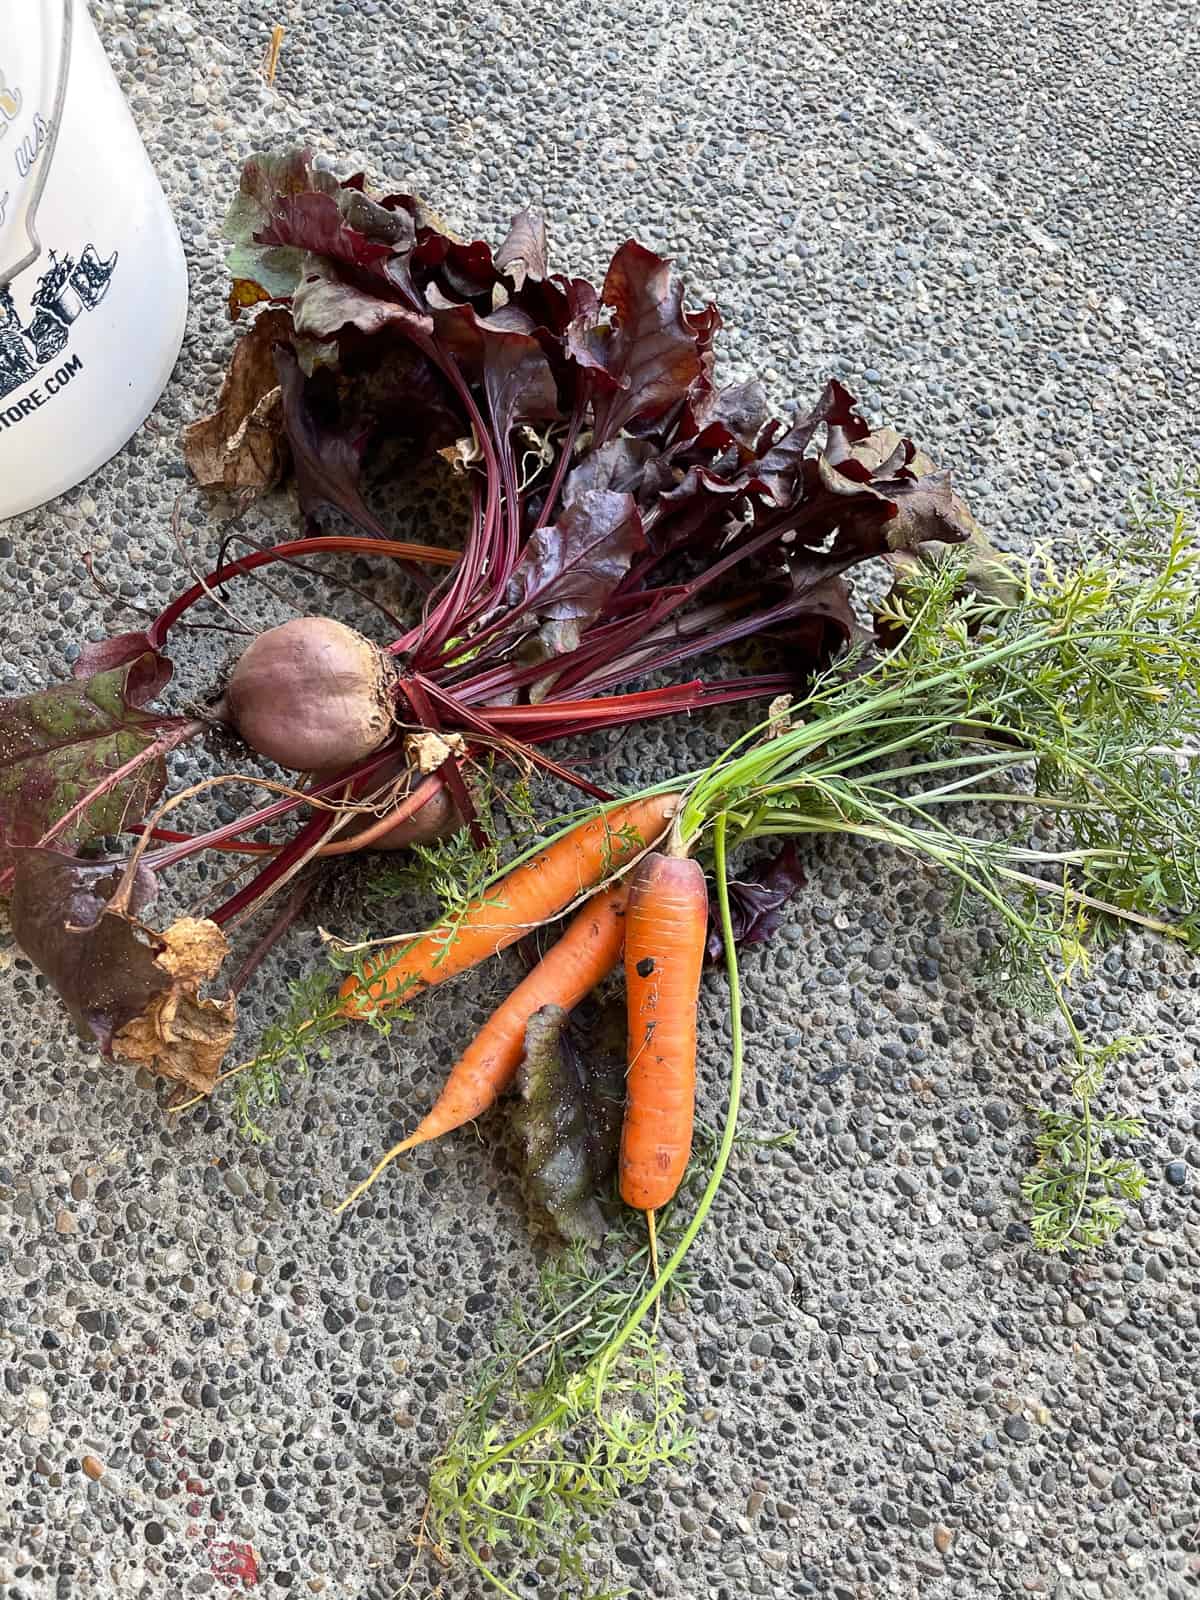 beets and carrots on a porch.